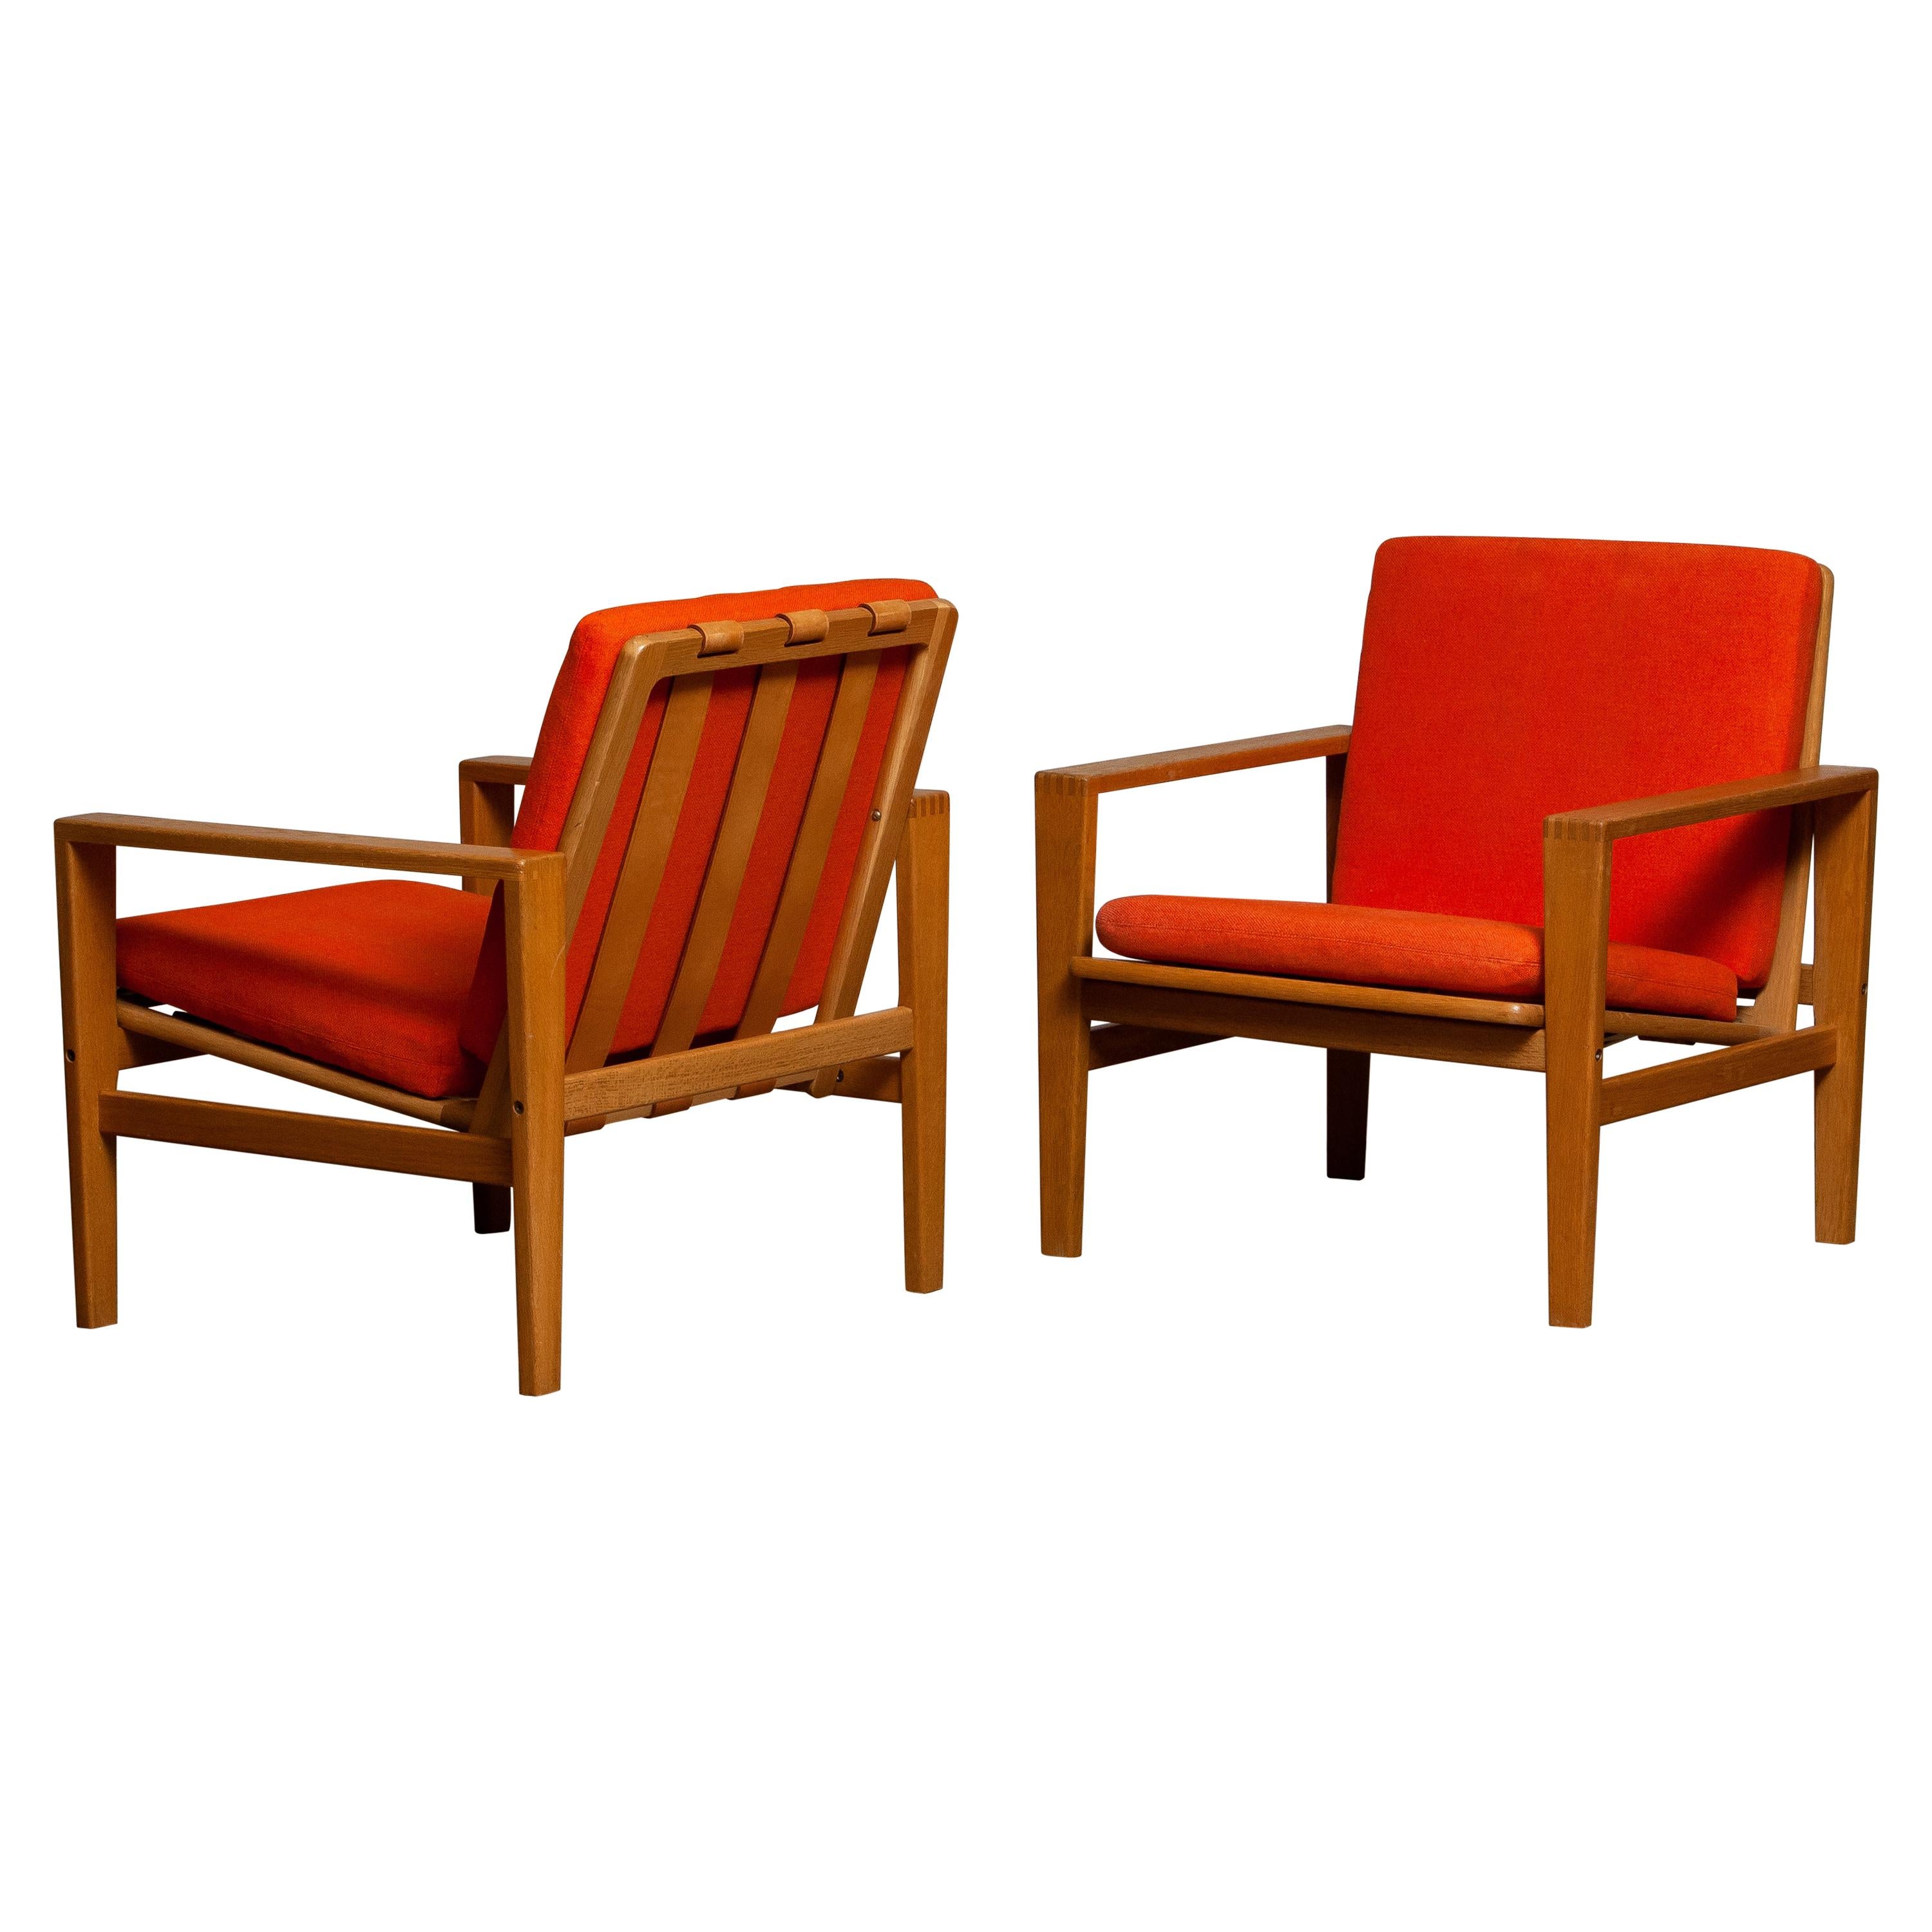 1960s Pair of Lounge / Easy Chairs in Oak Leather Fabric by Erik Merthen for Ire